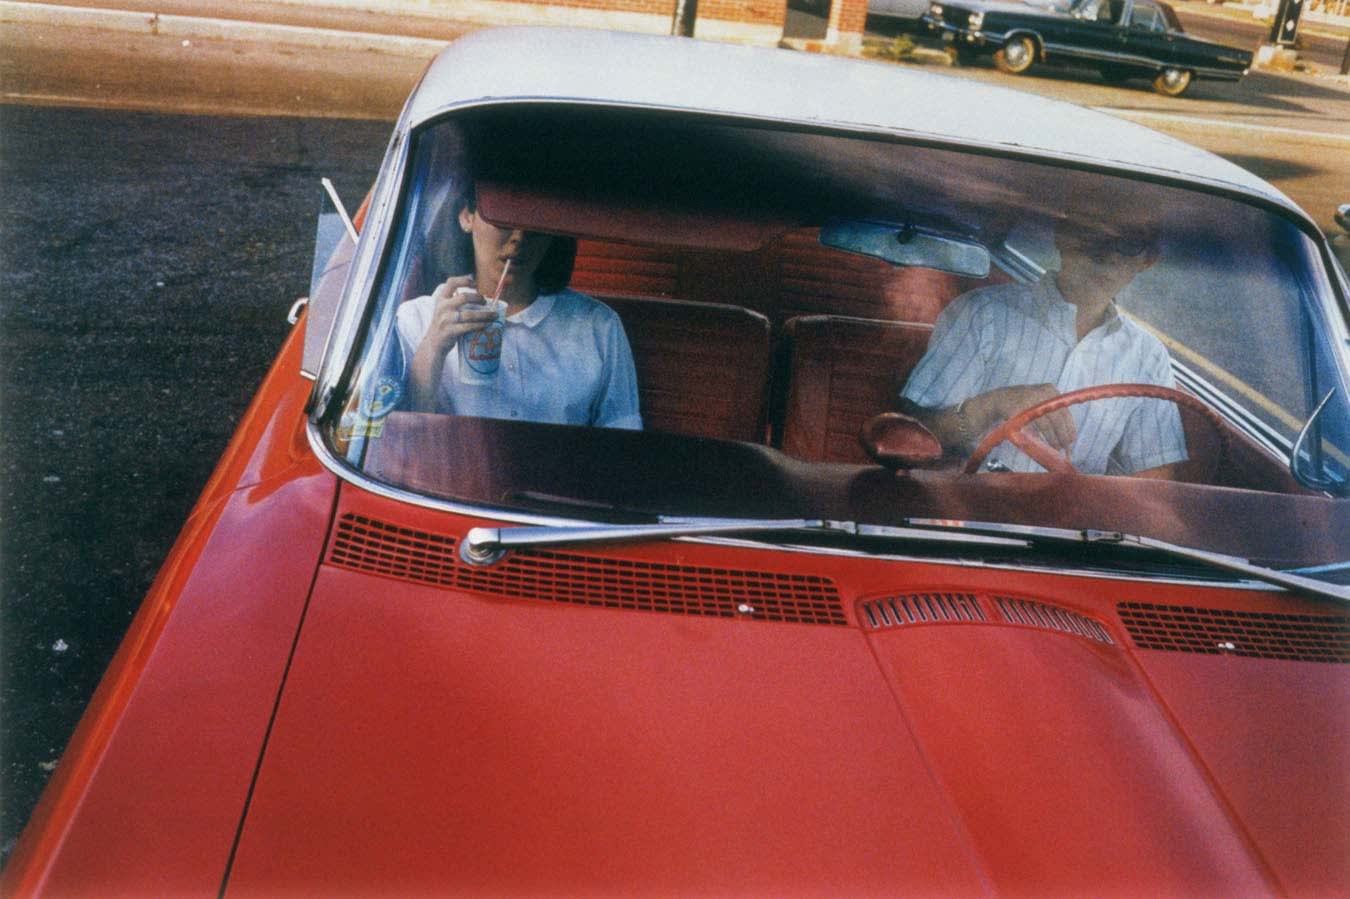 William Eggleston, Untitled (Couple in Red Car at Drive-In Restaurant), Memphis, TN [From Dust Bells 2], 1965-68